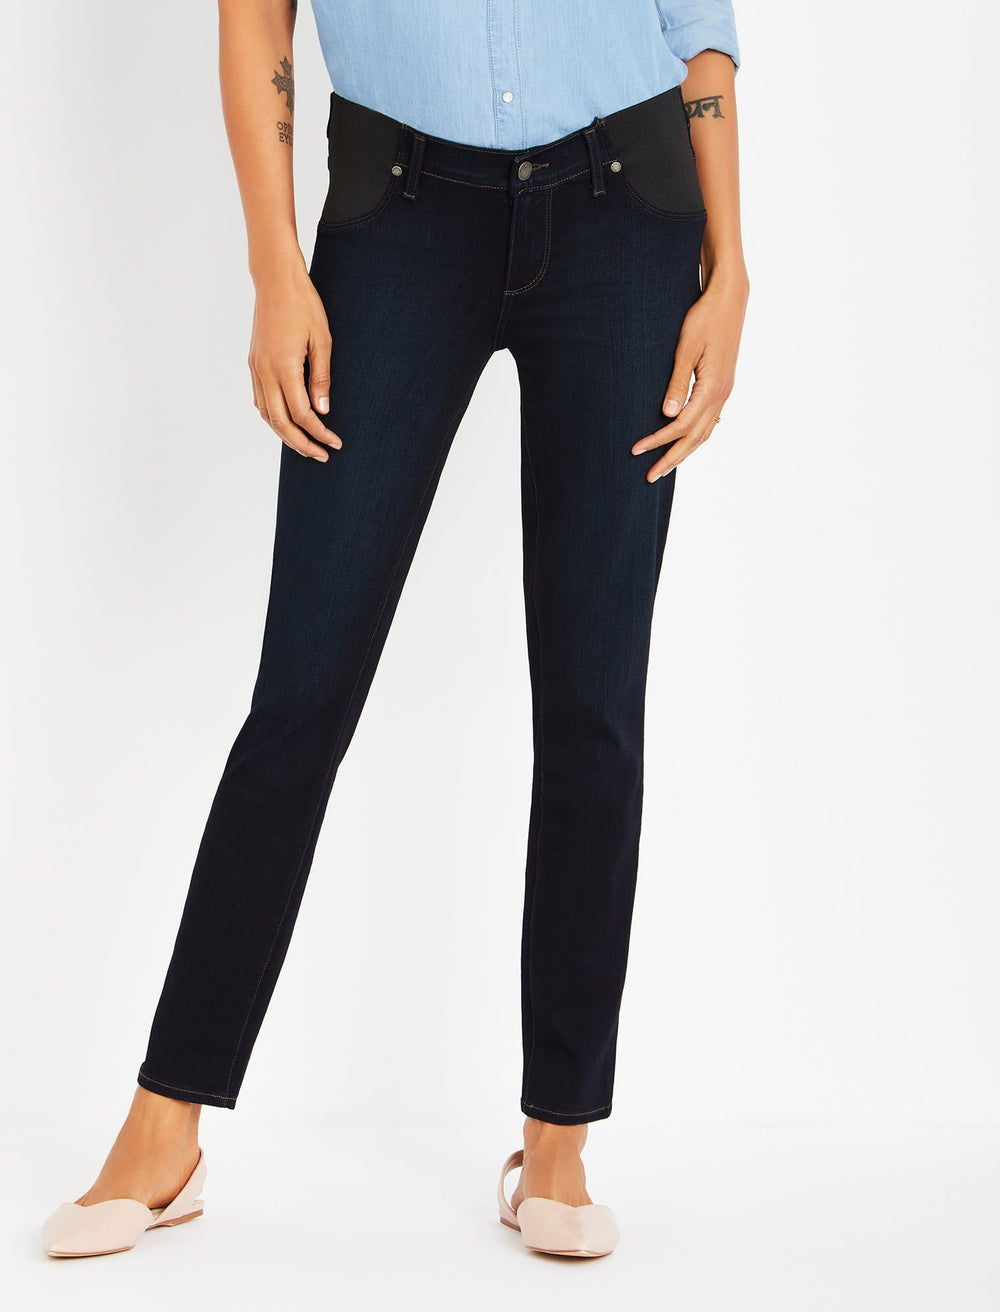 Paige Side Panel Verdugo Ankle Maternity Jeans - A Pea In the Pod